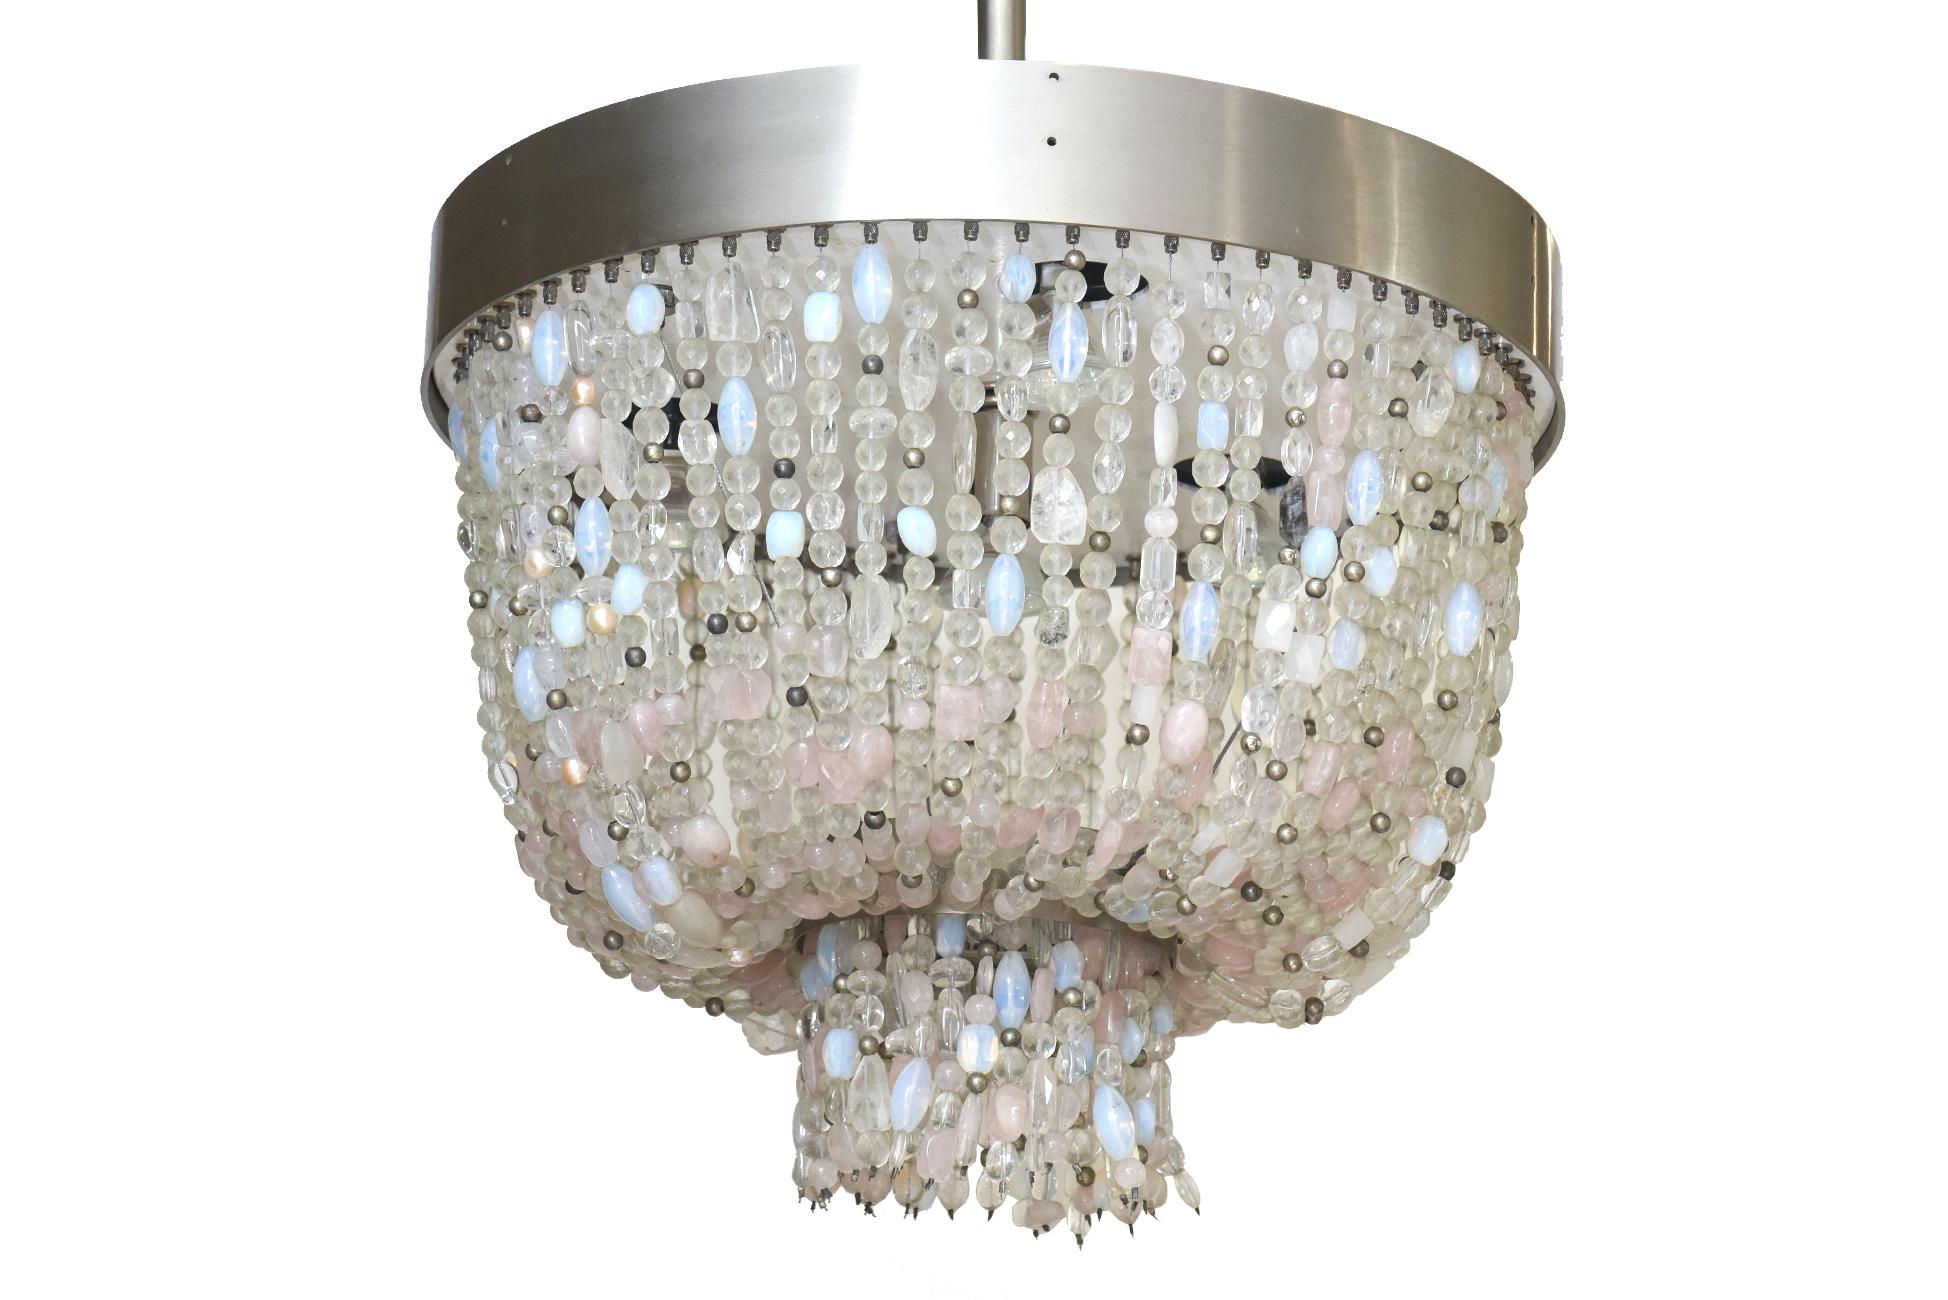 This lovely 2 tier chandelier by Thomas Fuchs for the Kentfield Collection in 2007 is called the Lavaliere. It is comprised of hanging beads of rose quartz, quartz and interspersed czech beads with silver filaments. The colors are pale blue to pale